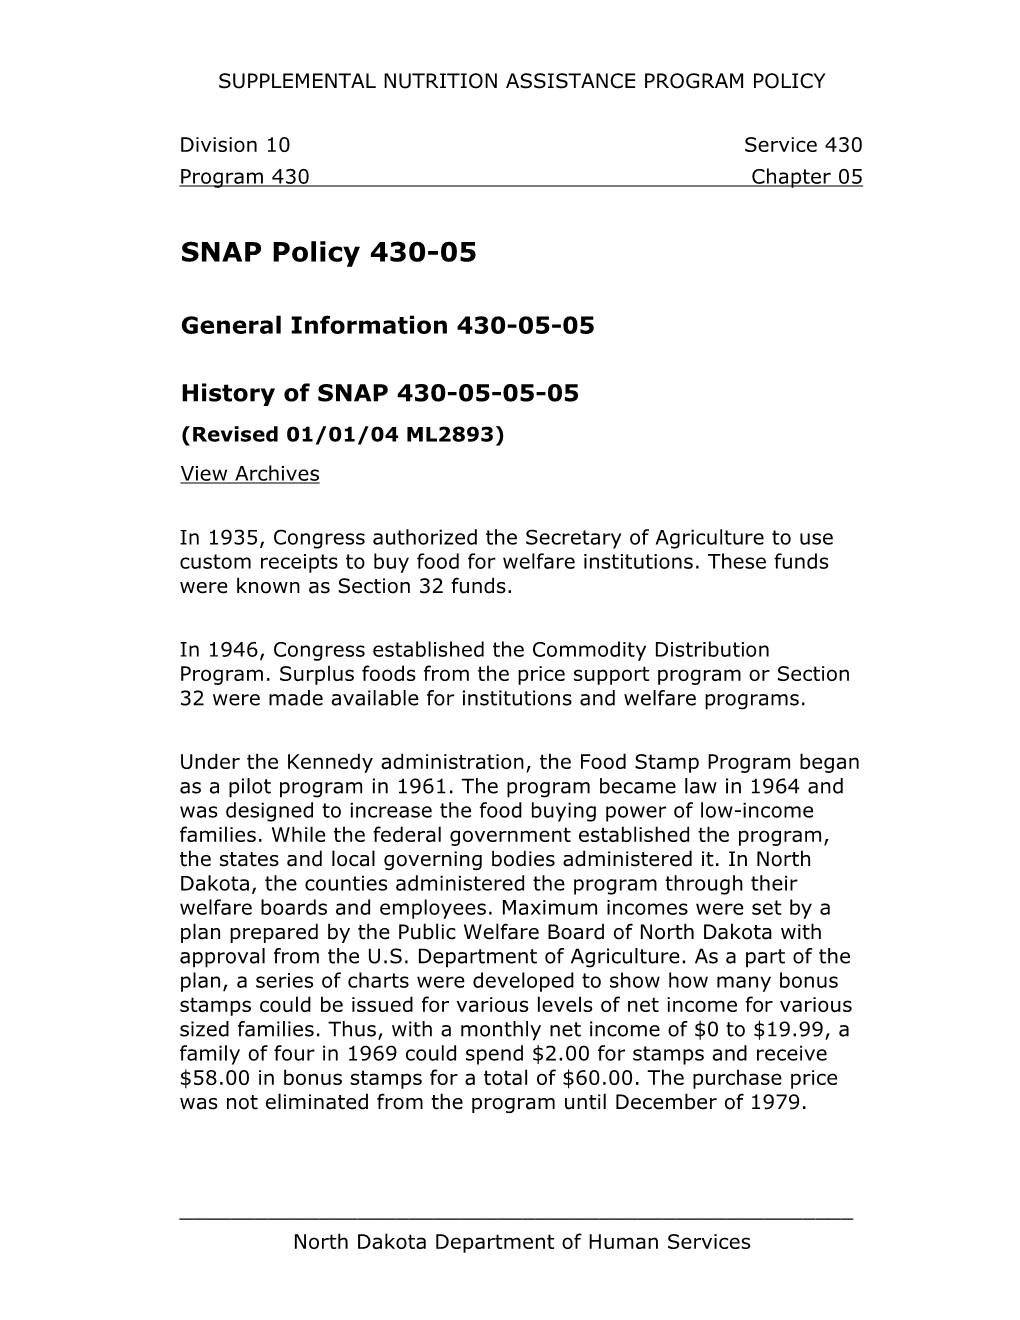 SNAP Policy 430-05